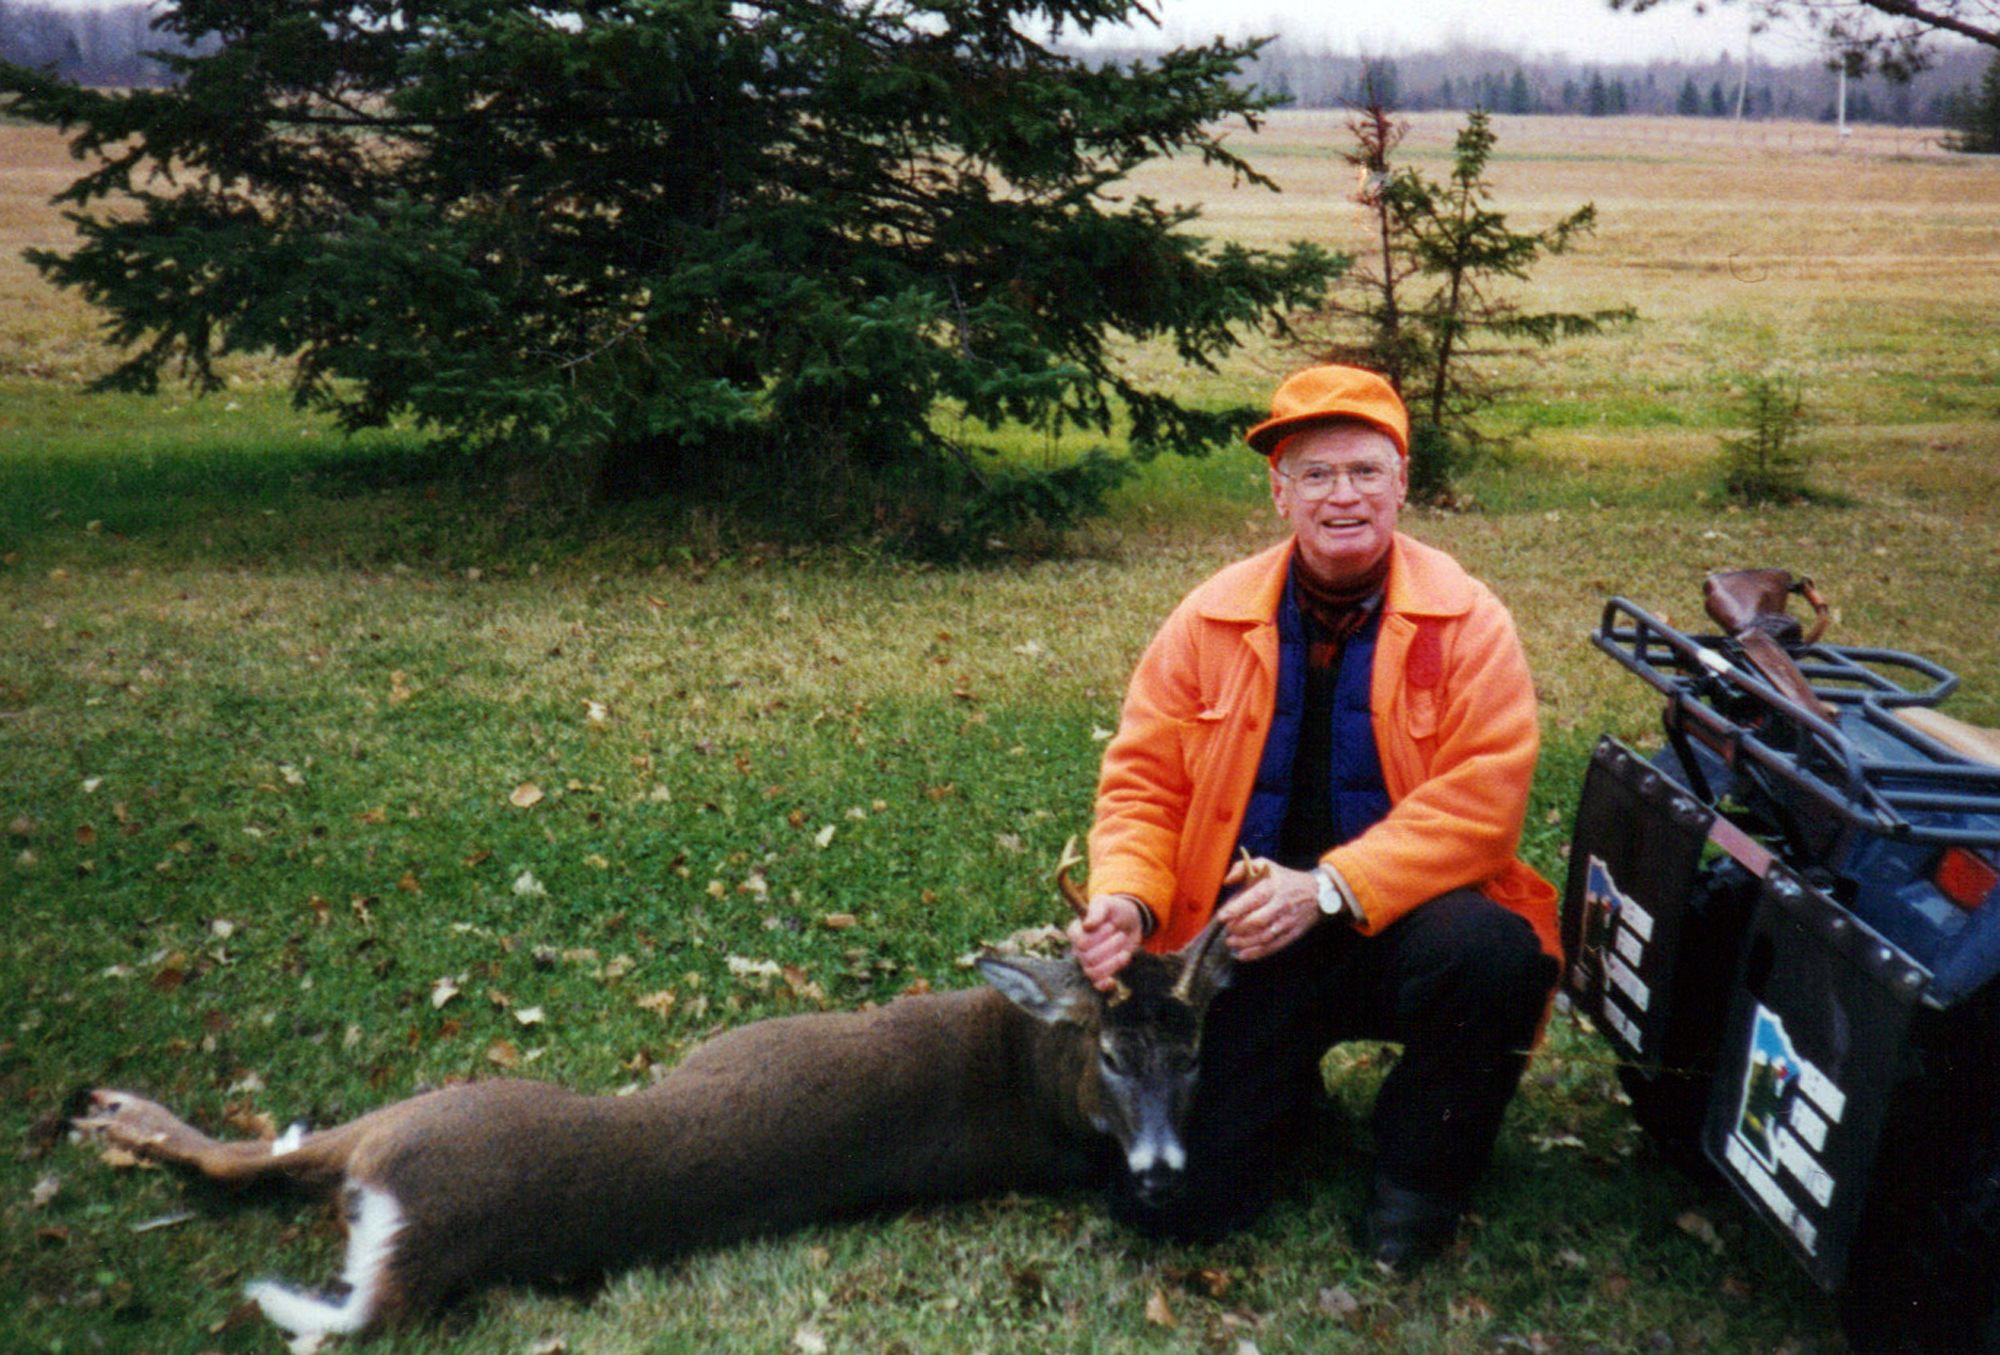 In this 2012 photo taken by Viola Hanson, George Krog poses with a buck he killed in Two Harbors, Minn. After a heart attack two years ago, Krog scaled back his hunting. Krogs request for a doe permit was turned away last fall _ the Department of Natural Resources limits how many doe permits it hands out by in order to protect the deer population. Senate Majority Leader Tom Bakk is pushing to allow residents 84 and older to take a doe without a special permit, giving Krog chance at getting another deer. (AP Photo/Courtesy of Viola Hanson)